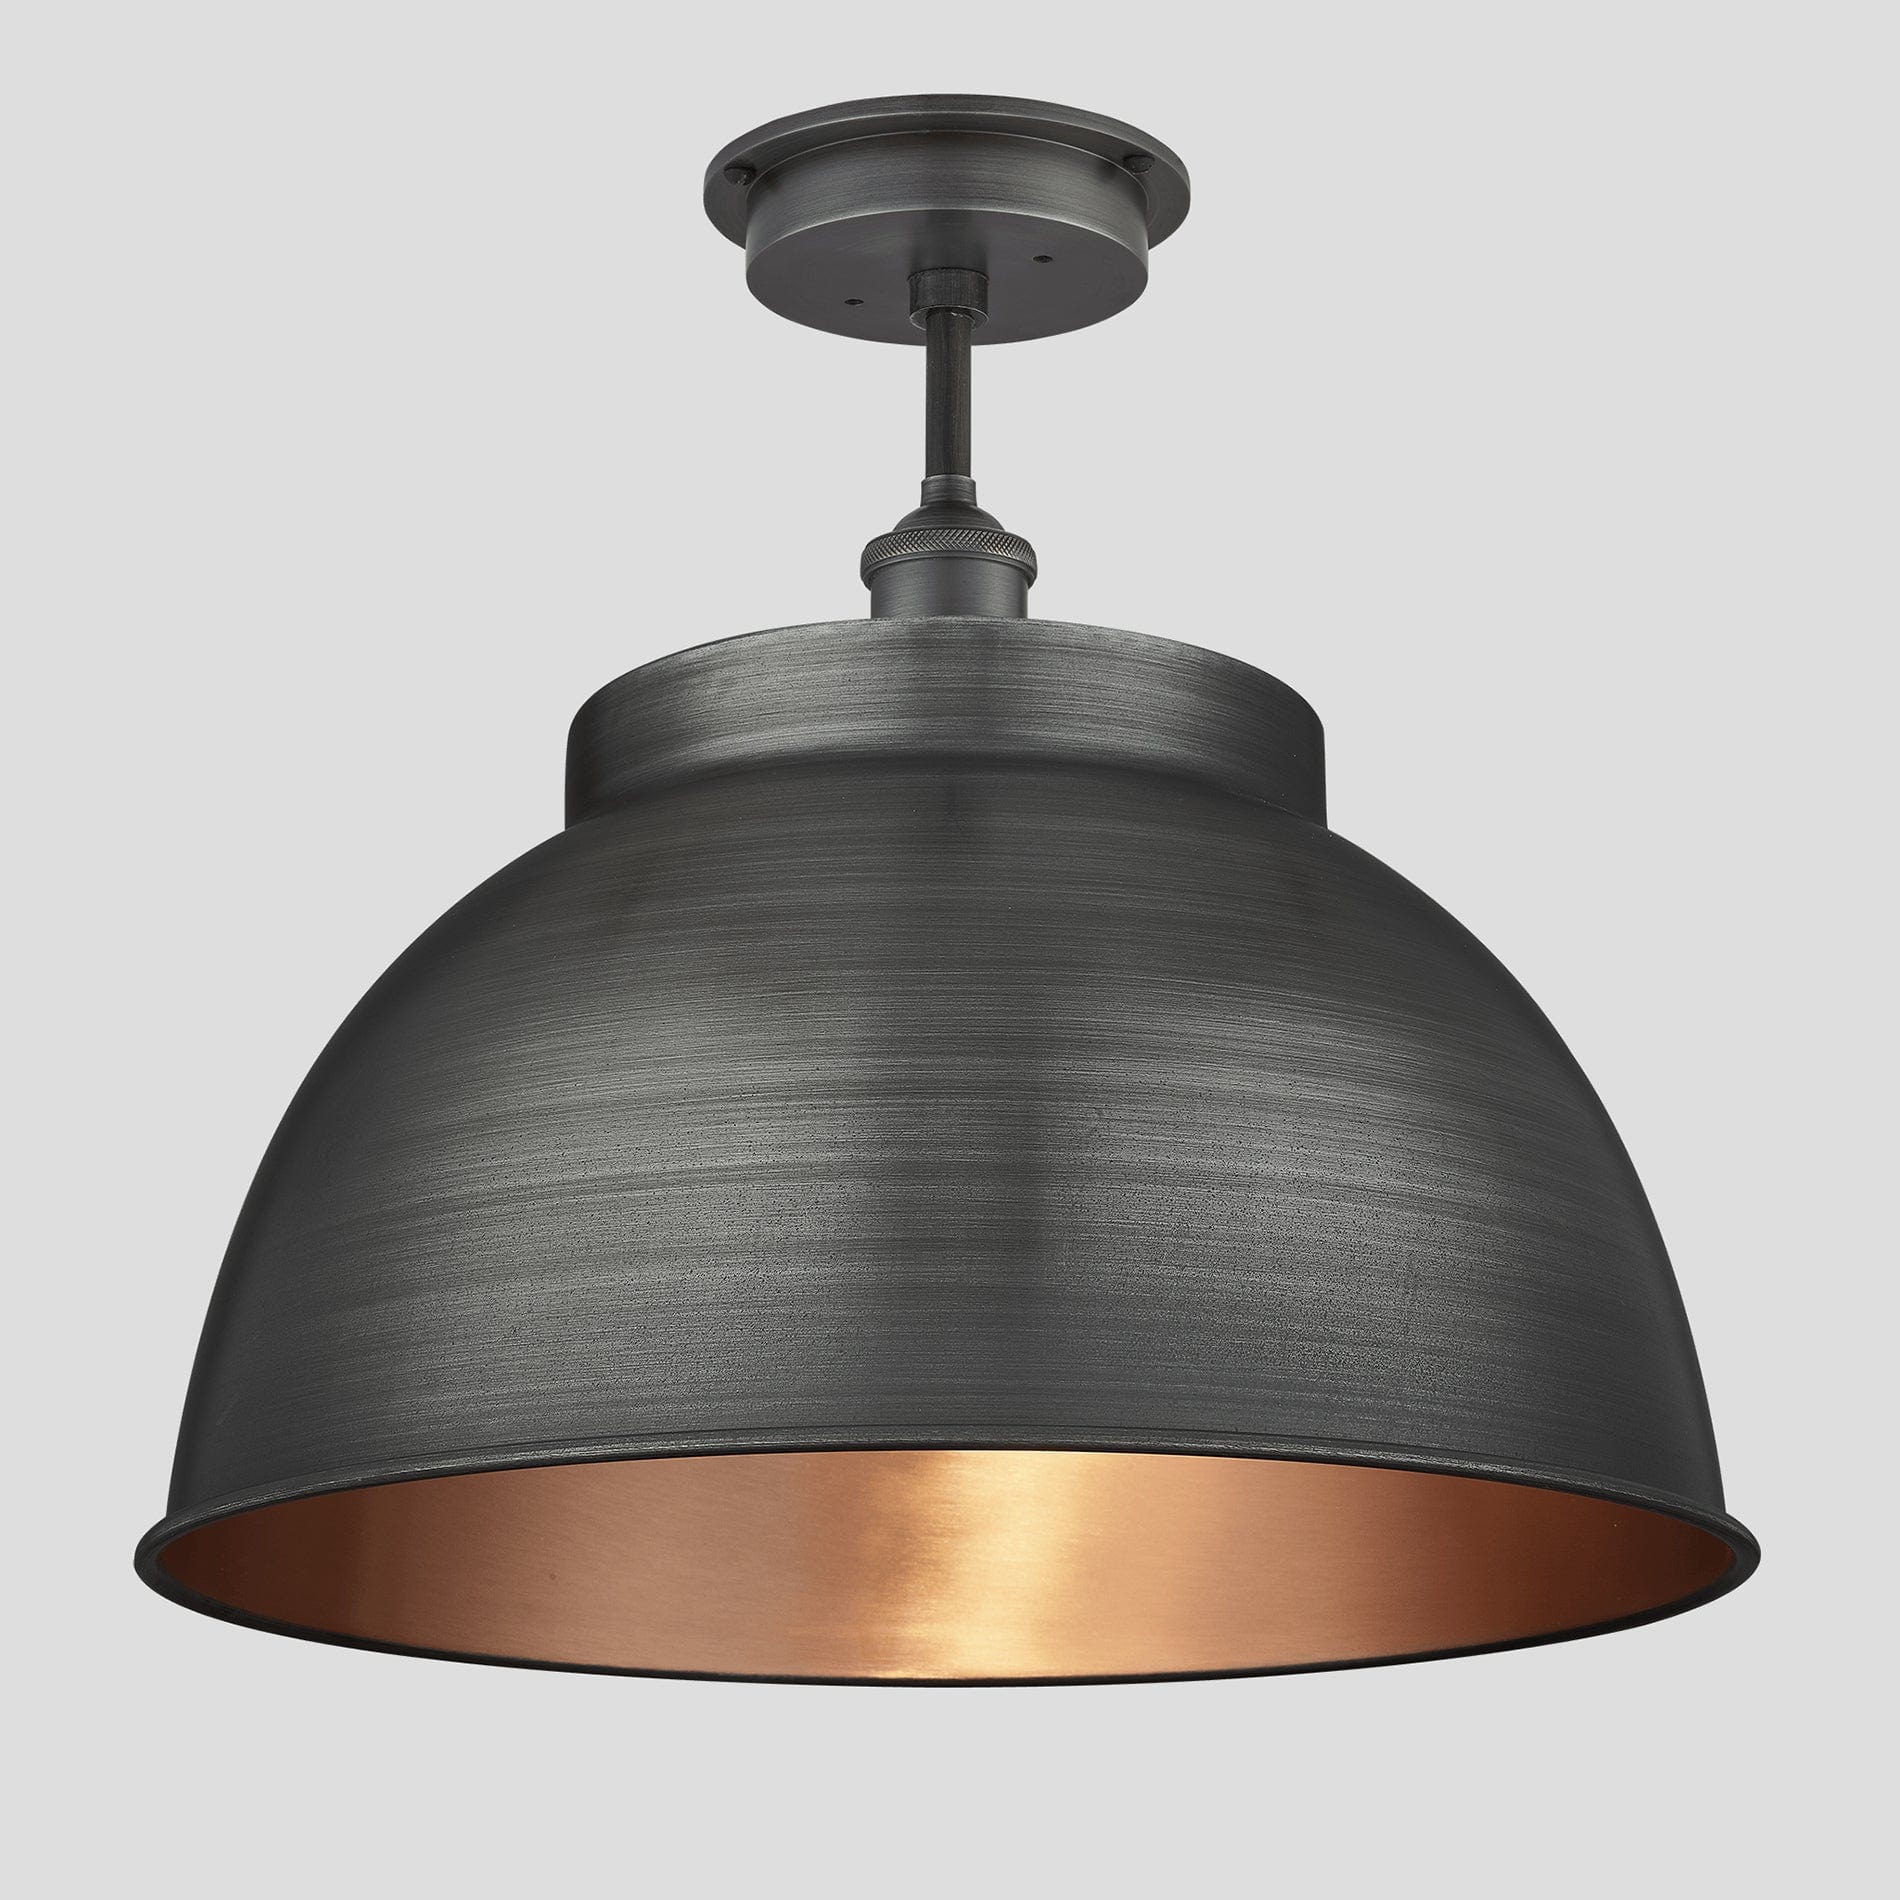 Brooklyn Outdoor & Bathroom Dome Flush Mount - 17 Inch - Pewter & Copper Industville BR-IP65-DFM17-CP-PH